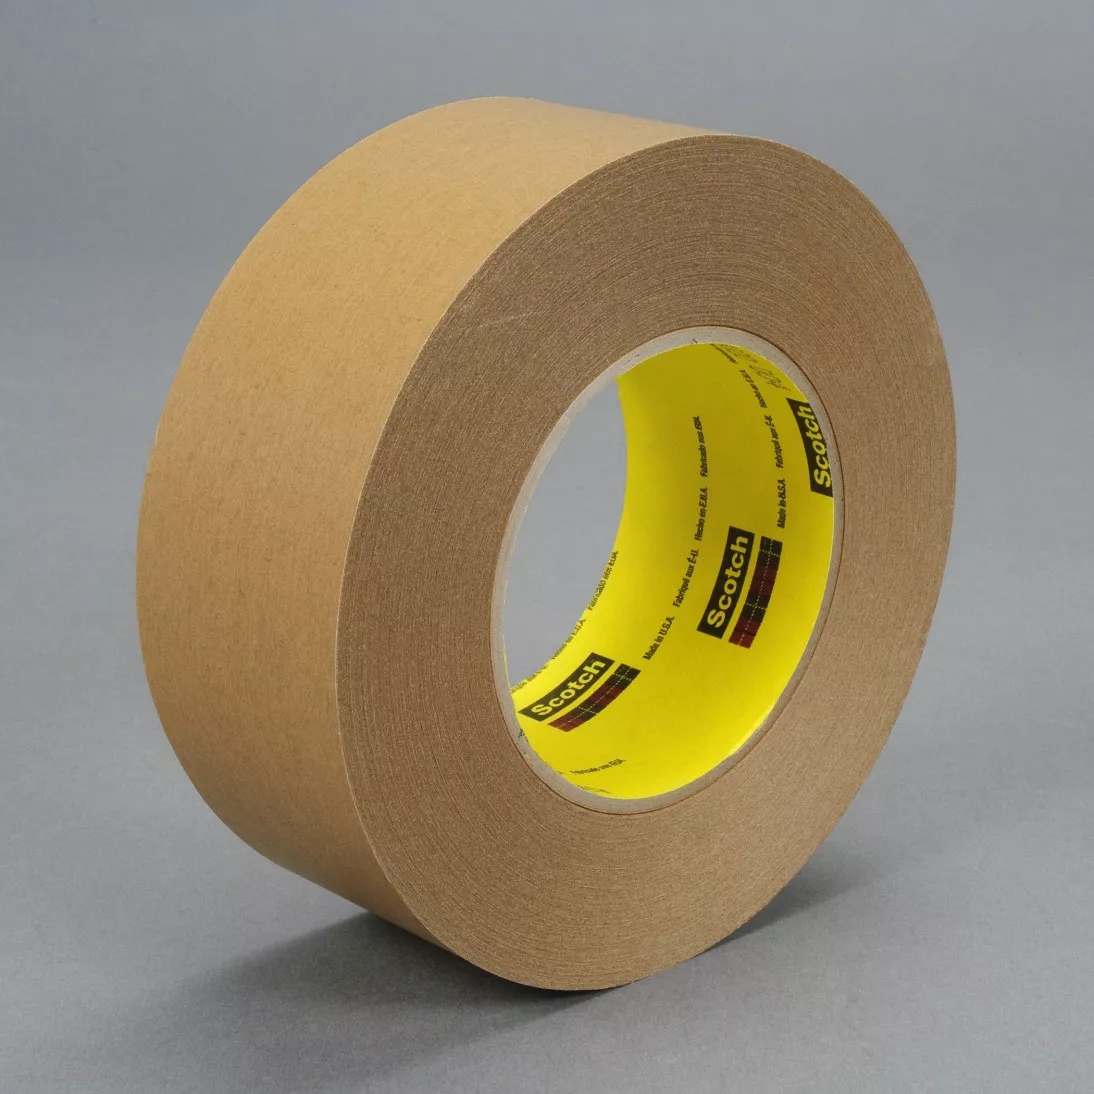 3M™ Repulpable Strong Single Coated Tape R3187, Kraft, 96 mm x 110 m,
7.5 mil, 2 rolls per case